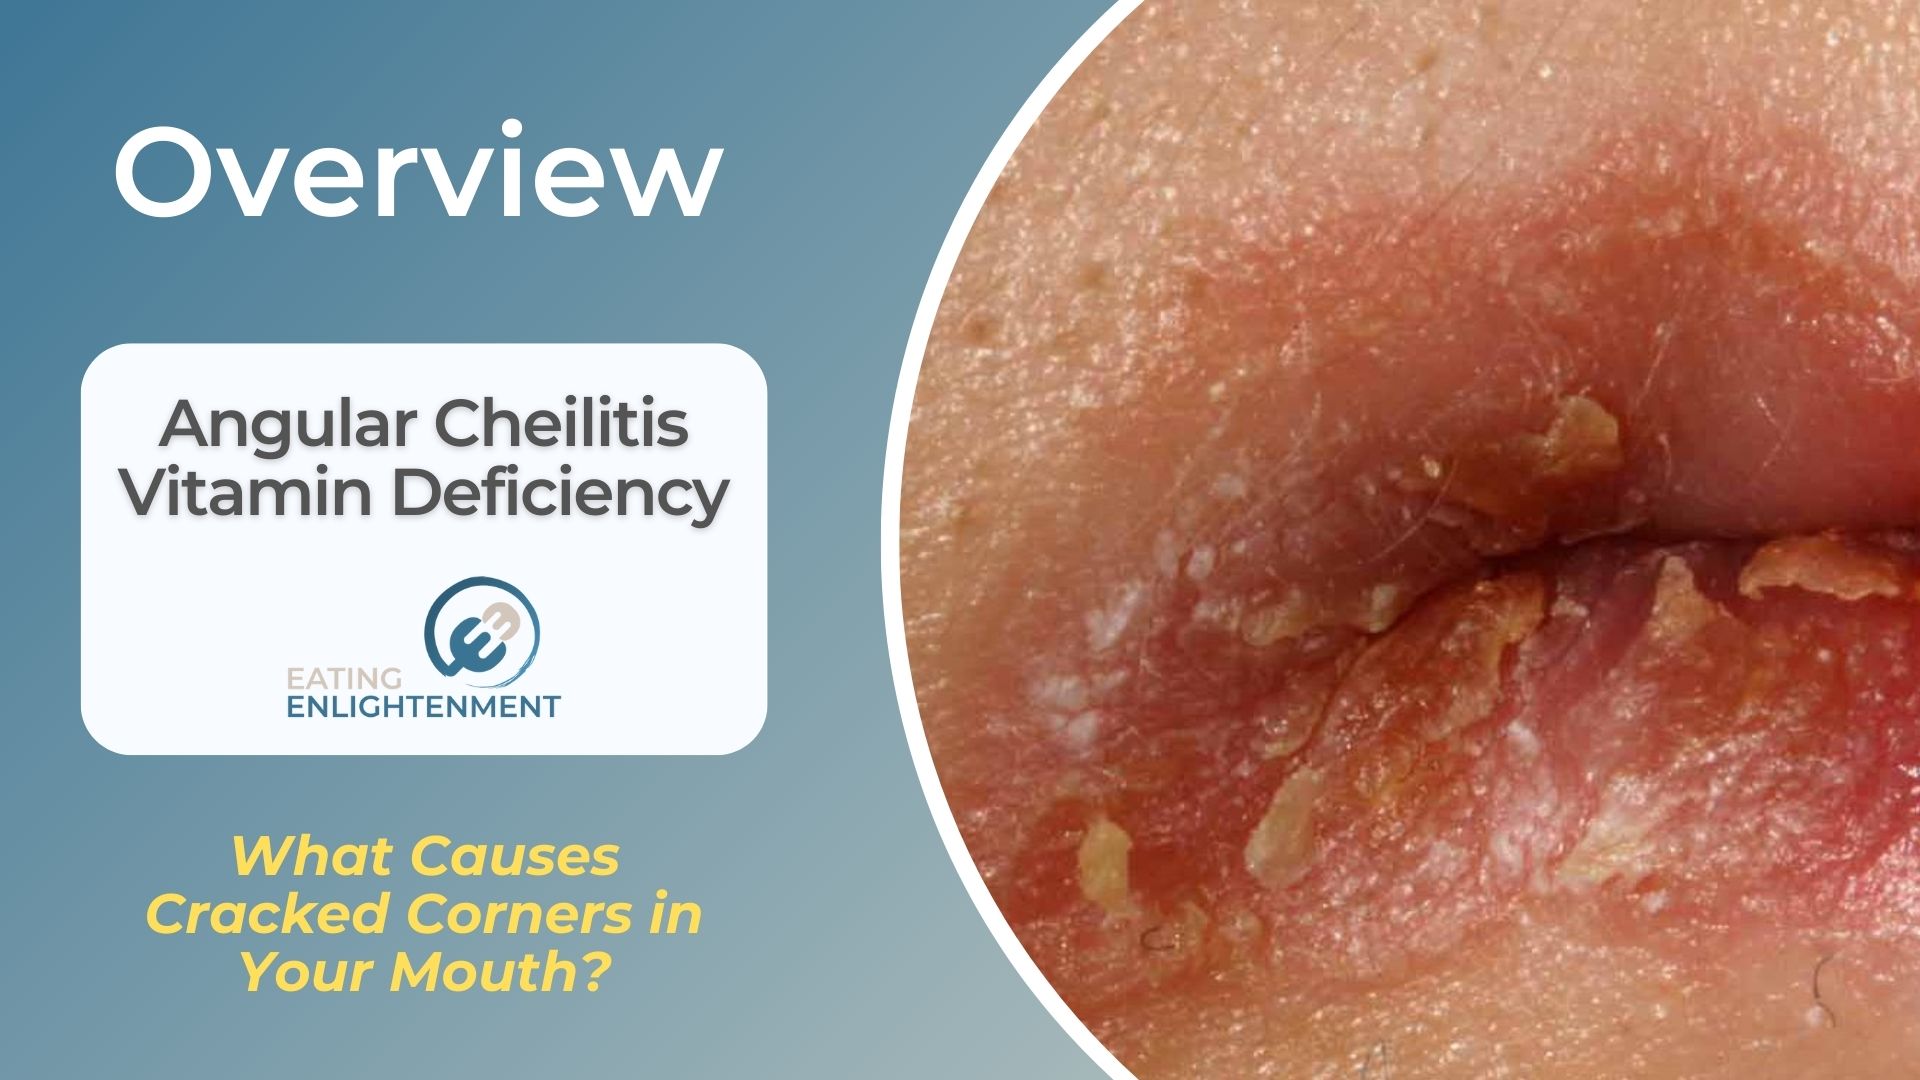 Angular Cheilitis Vitamin Deficiency What Causes Cracked Corners in Your Mouth